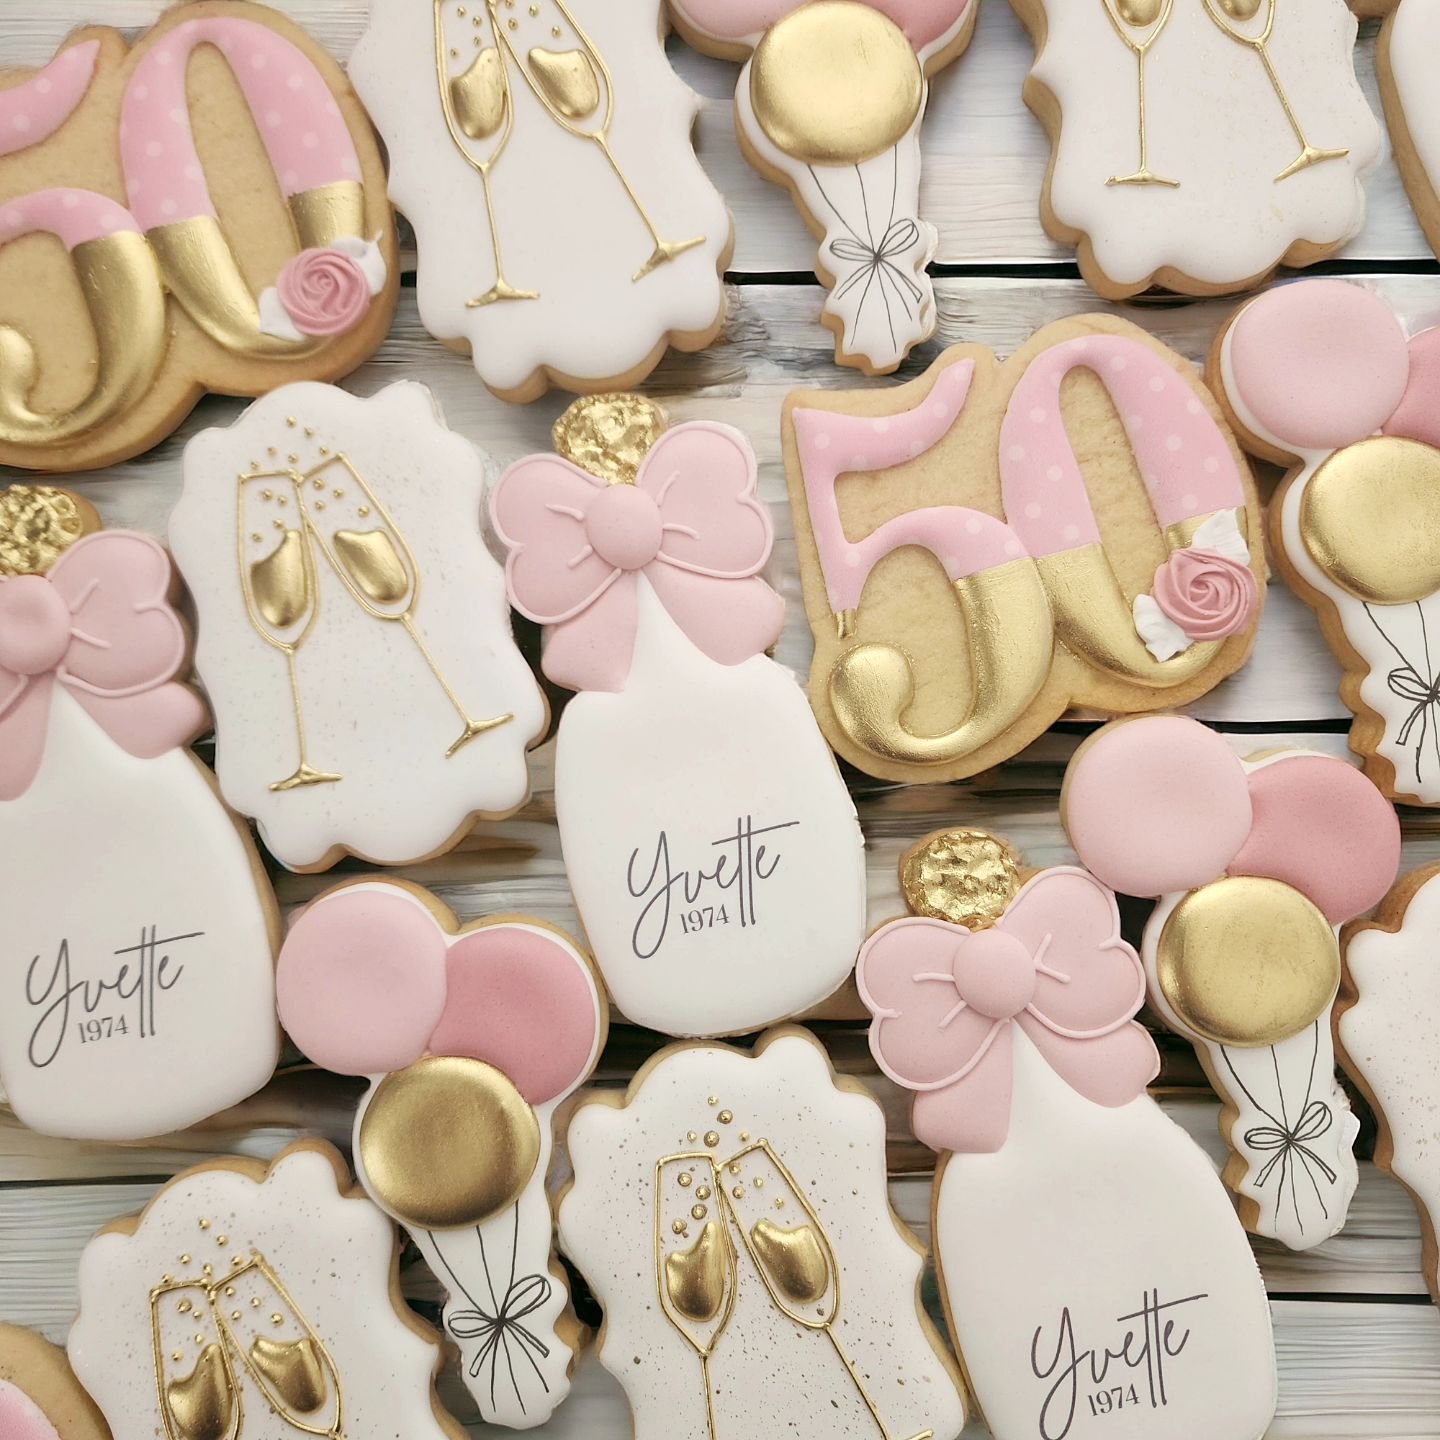 Check out these gorgeous pink and gold cookies I made for Yvette's 50th bash! 🎉

I had a blast crafting those champagne bottles; they're definitely a highlight. And that texture trick on top of the bottles? Too much fun!🍾

If you're planning an eve